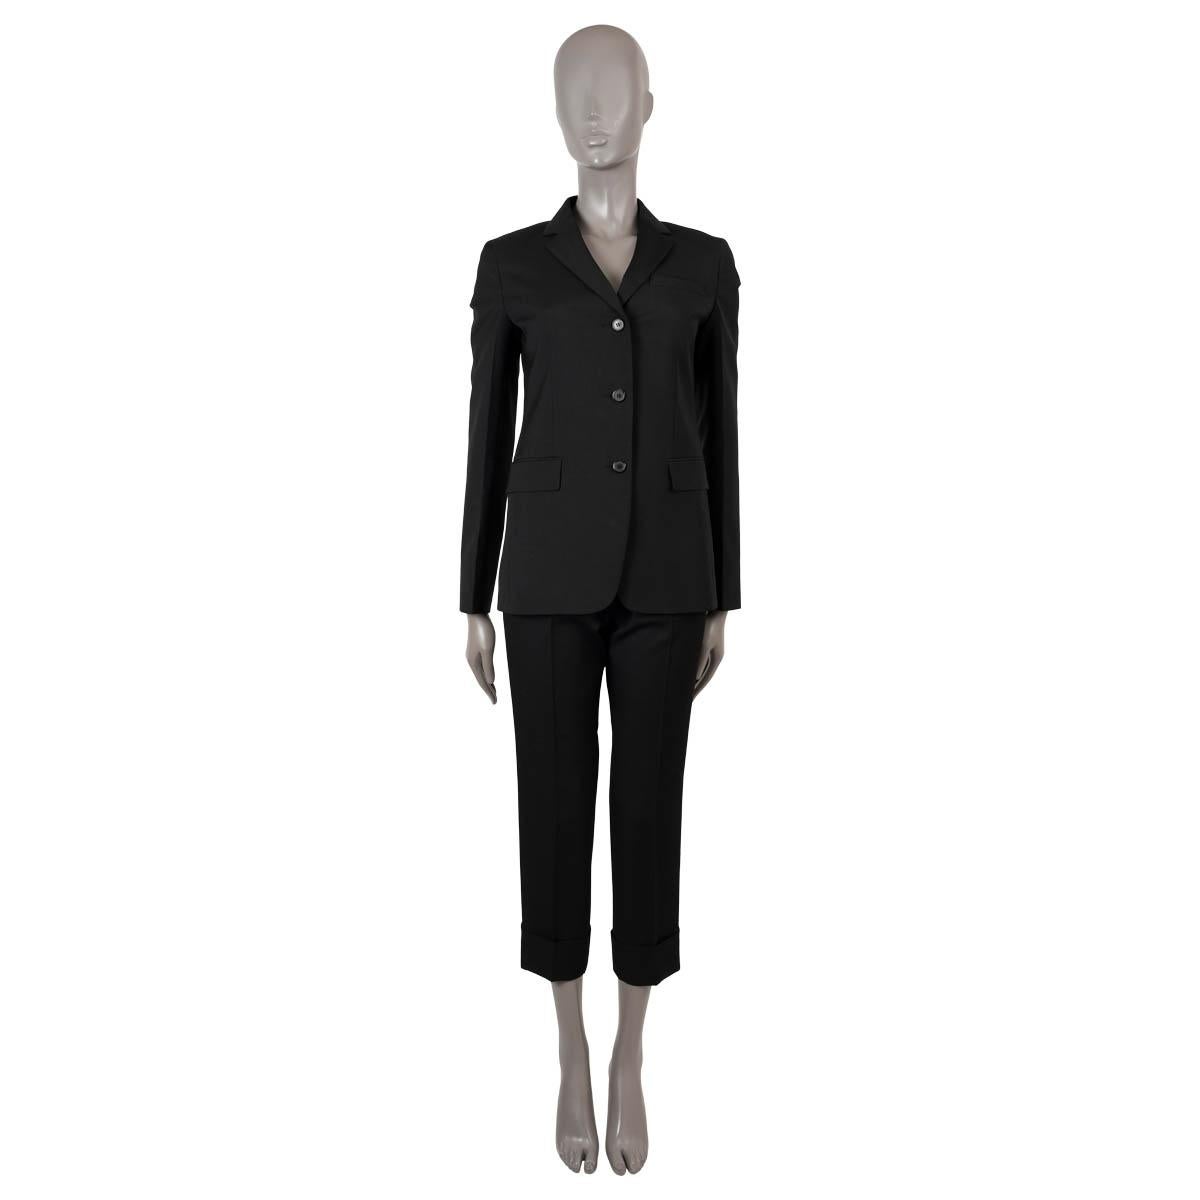 100% authentic Prada classic notch lapel blazer in black virgin wool (100%) and lined in black viscose (100%). Thes design features two front flap pockets, one slit chest pocket, belt loops, a slitted back and three front buttons. Has been worn and